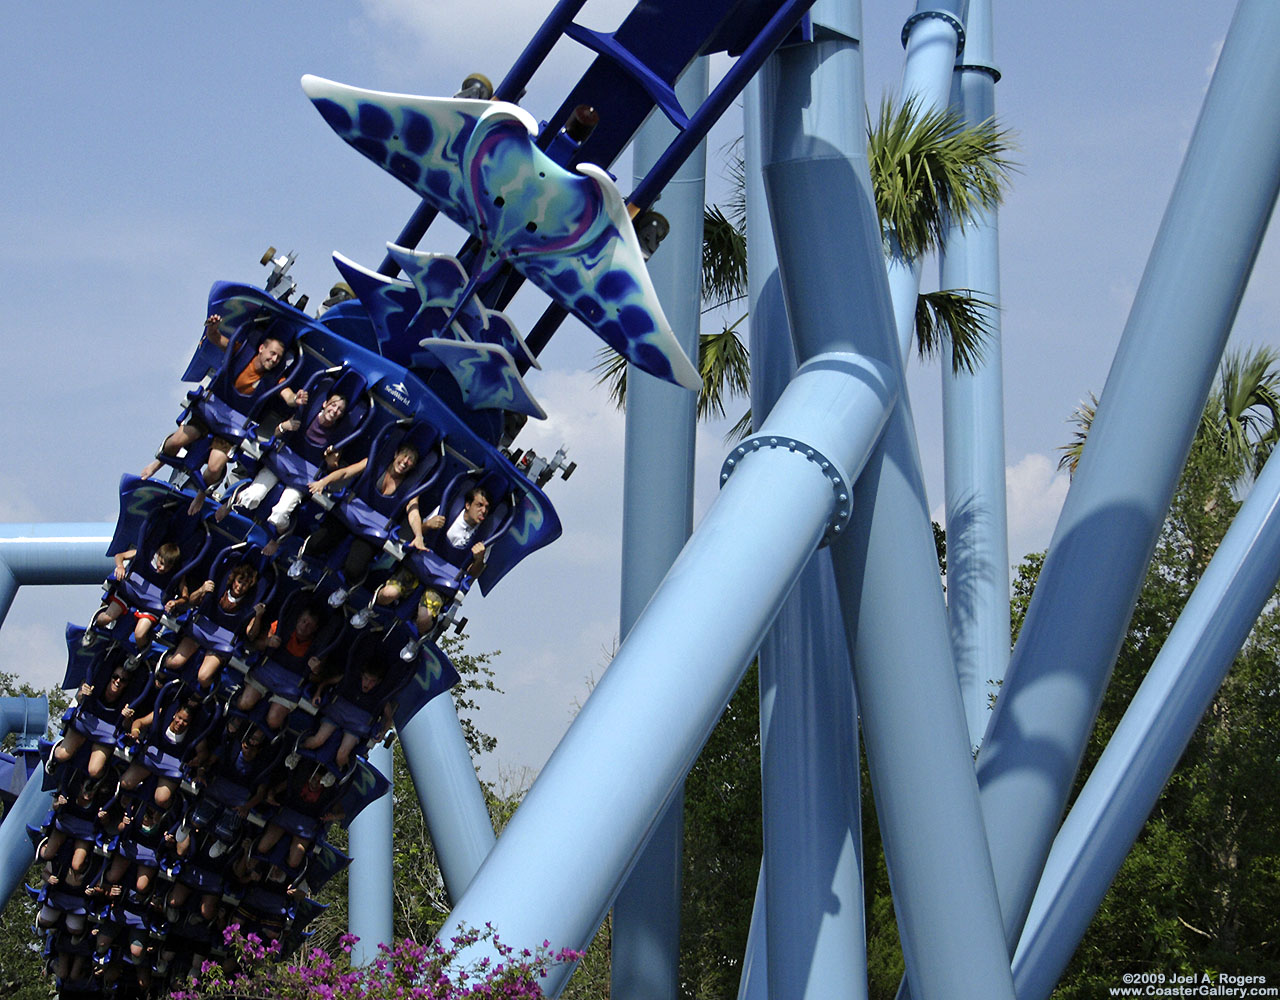 Close-up of a flying roller coaster train and riders